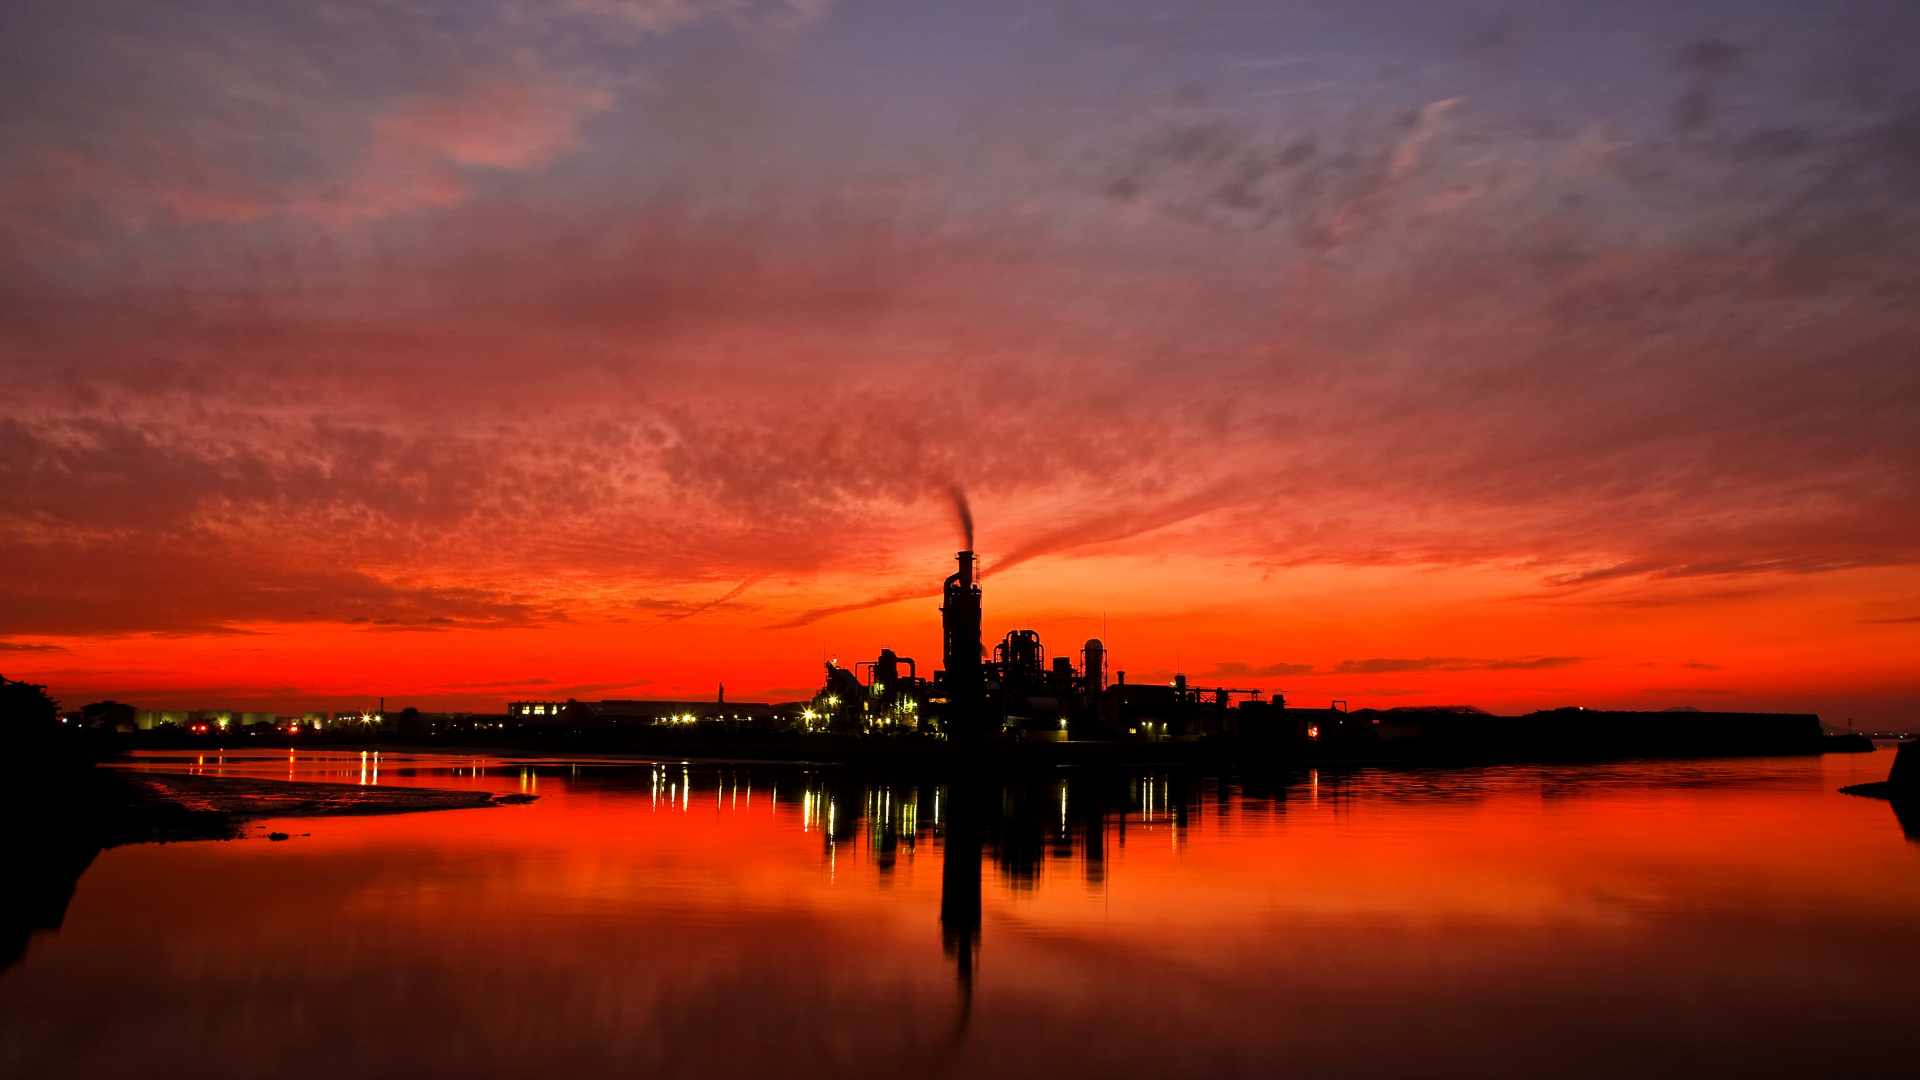 Silhouette of Building Near Body of Water During Sunset. Wallpaper in 1920x1080 Resolution